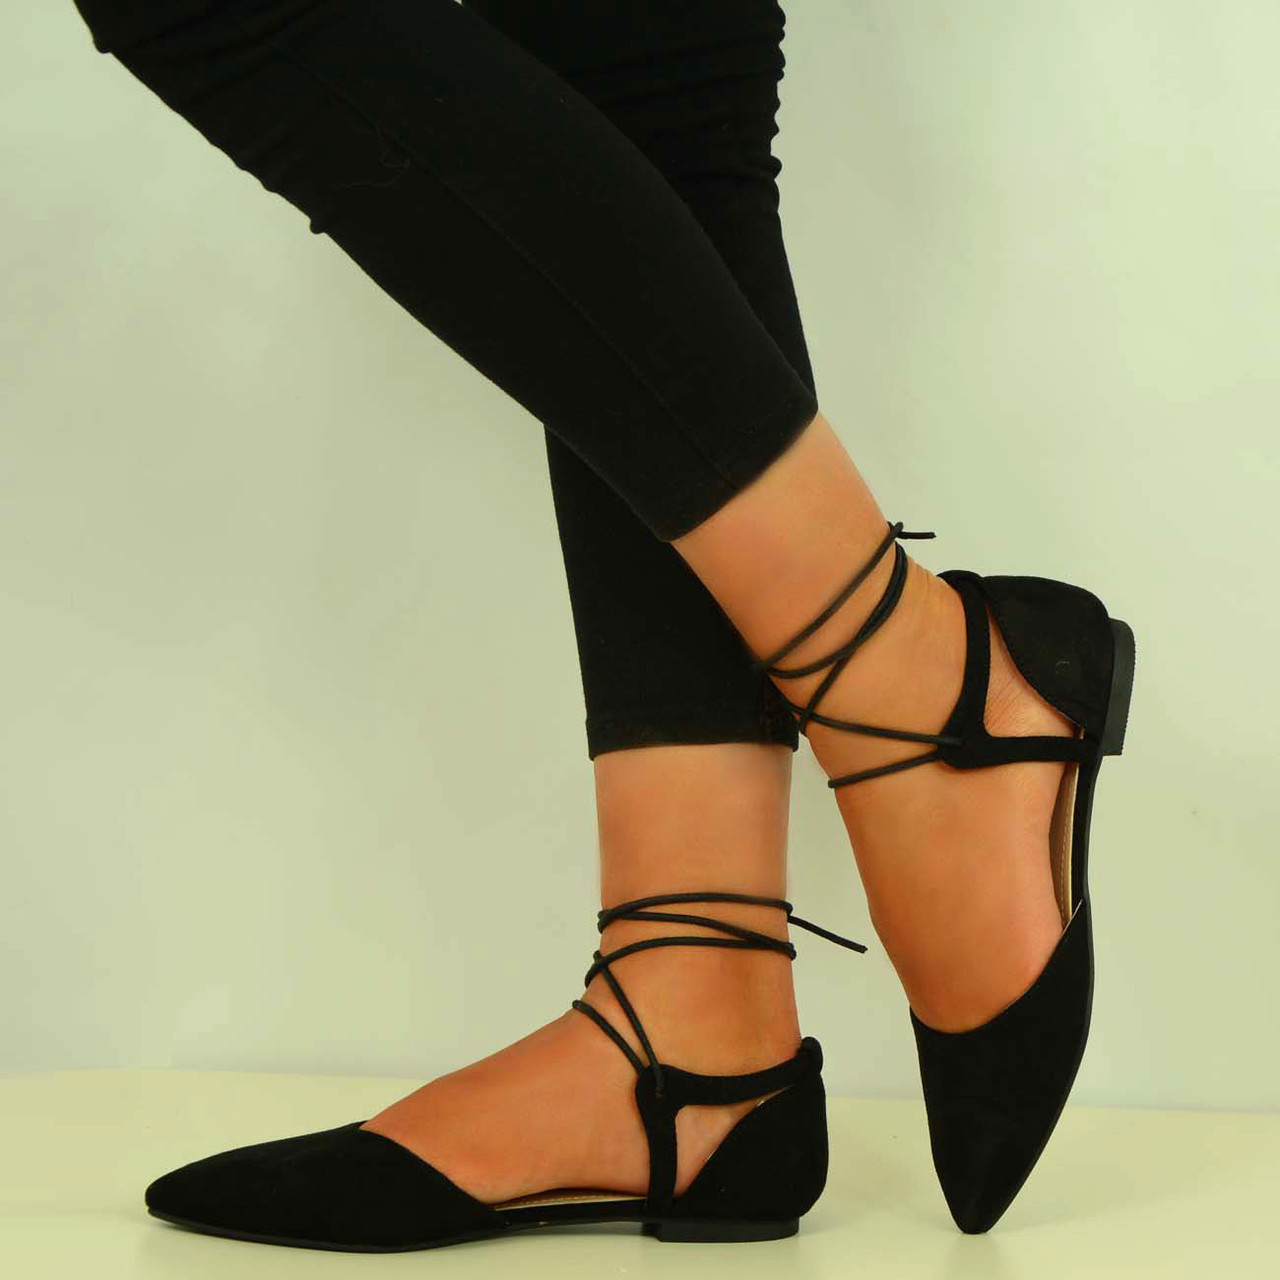 lace up dolly shoes